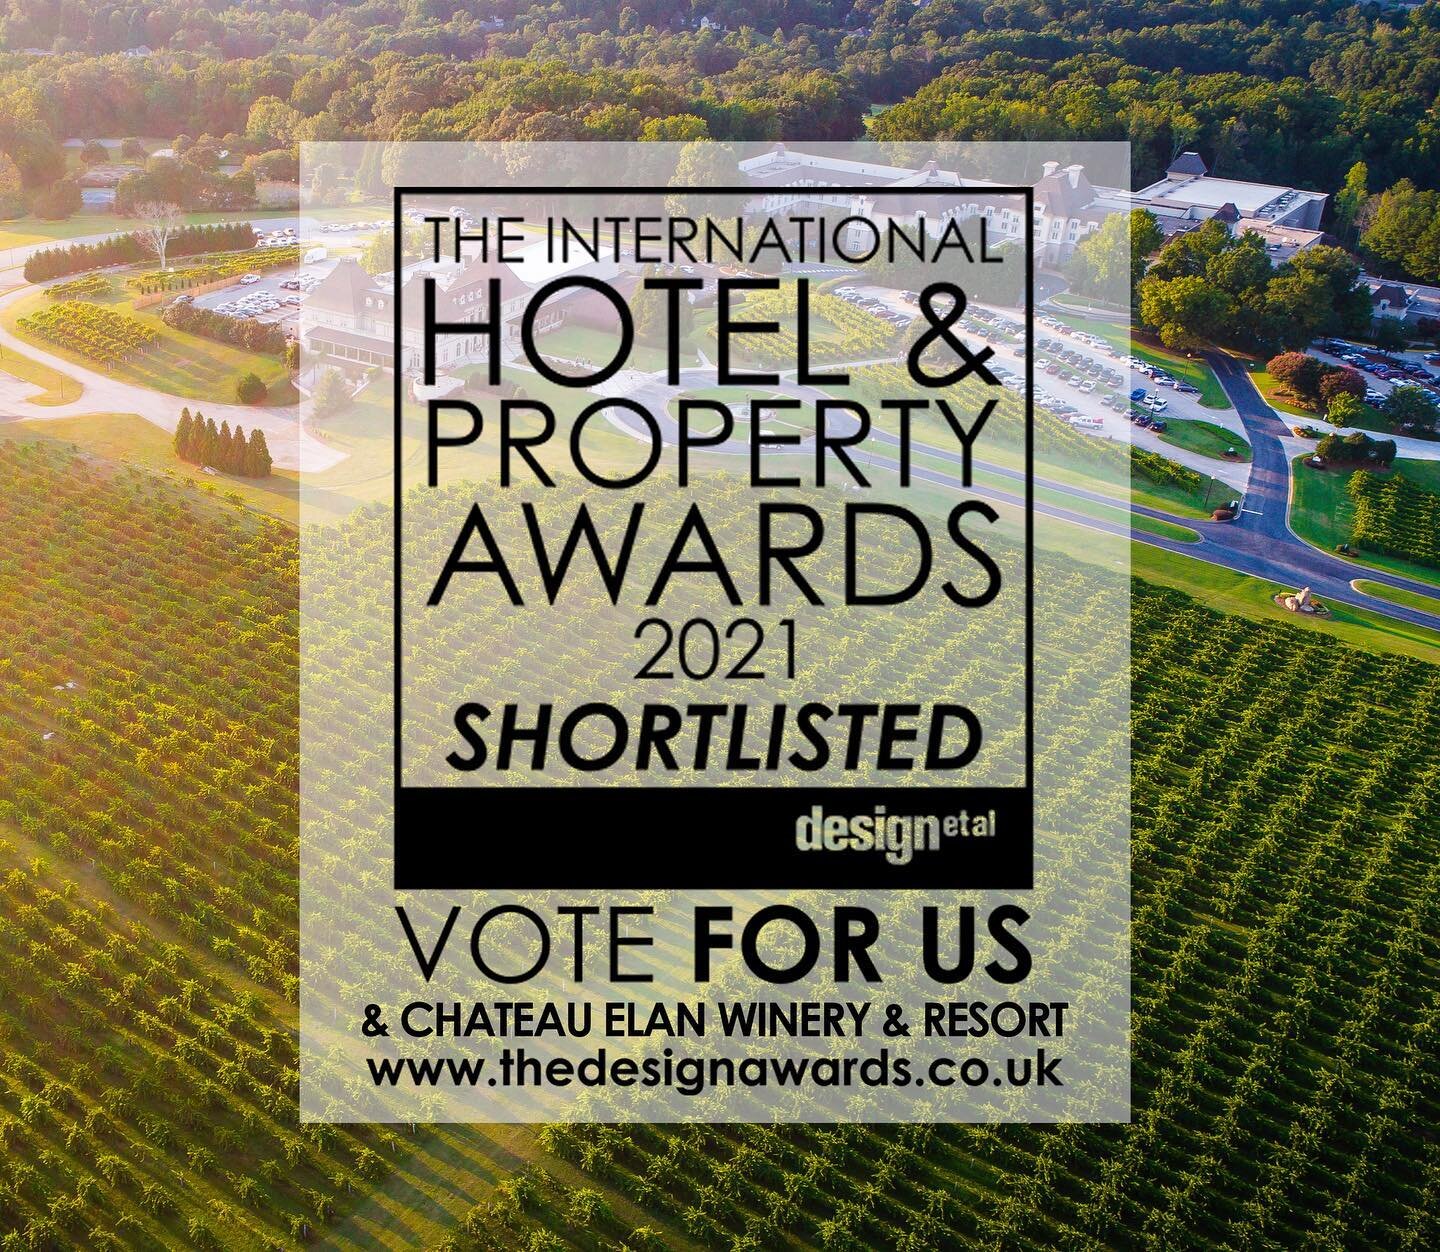 We need your help! We are excited to announce BLUR Workshop&rsquo;s renovation of Chateau Elan Winery &amp; Resort project has placed as finalist in THREE categories at the prestigious design et al - International Hotel &amp; Property Awards this yea